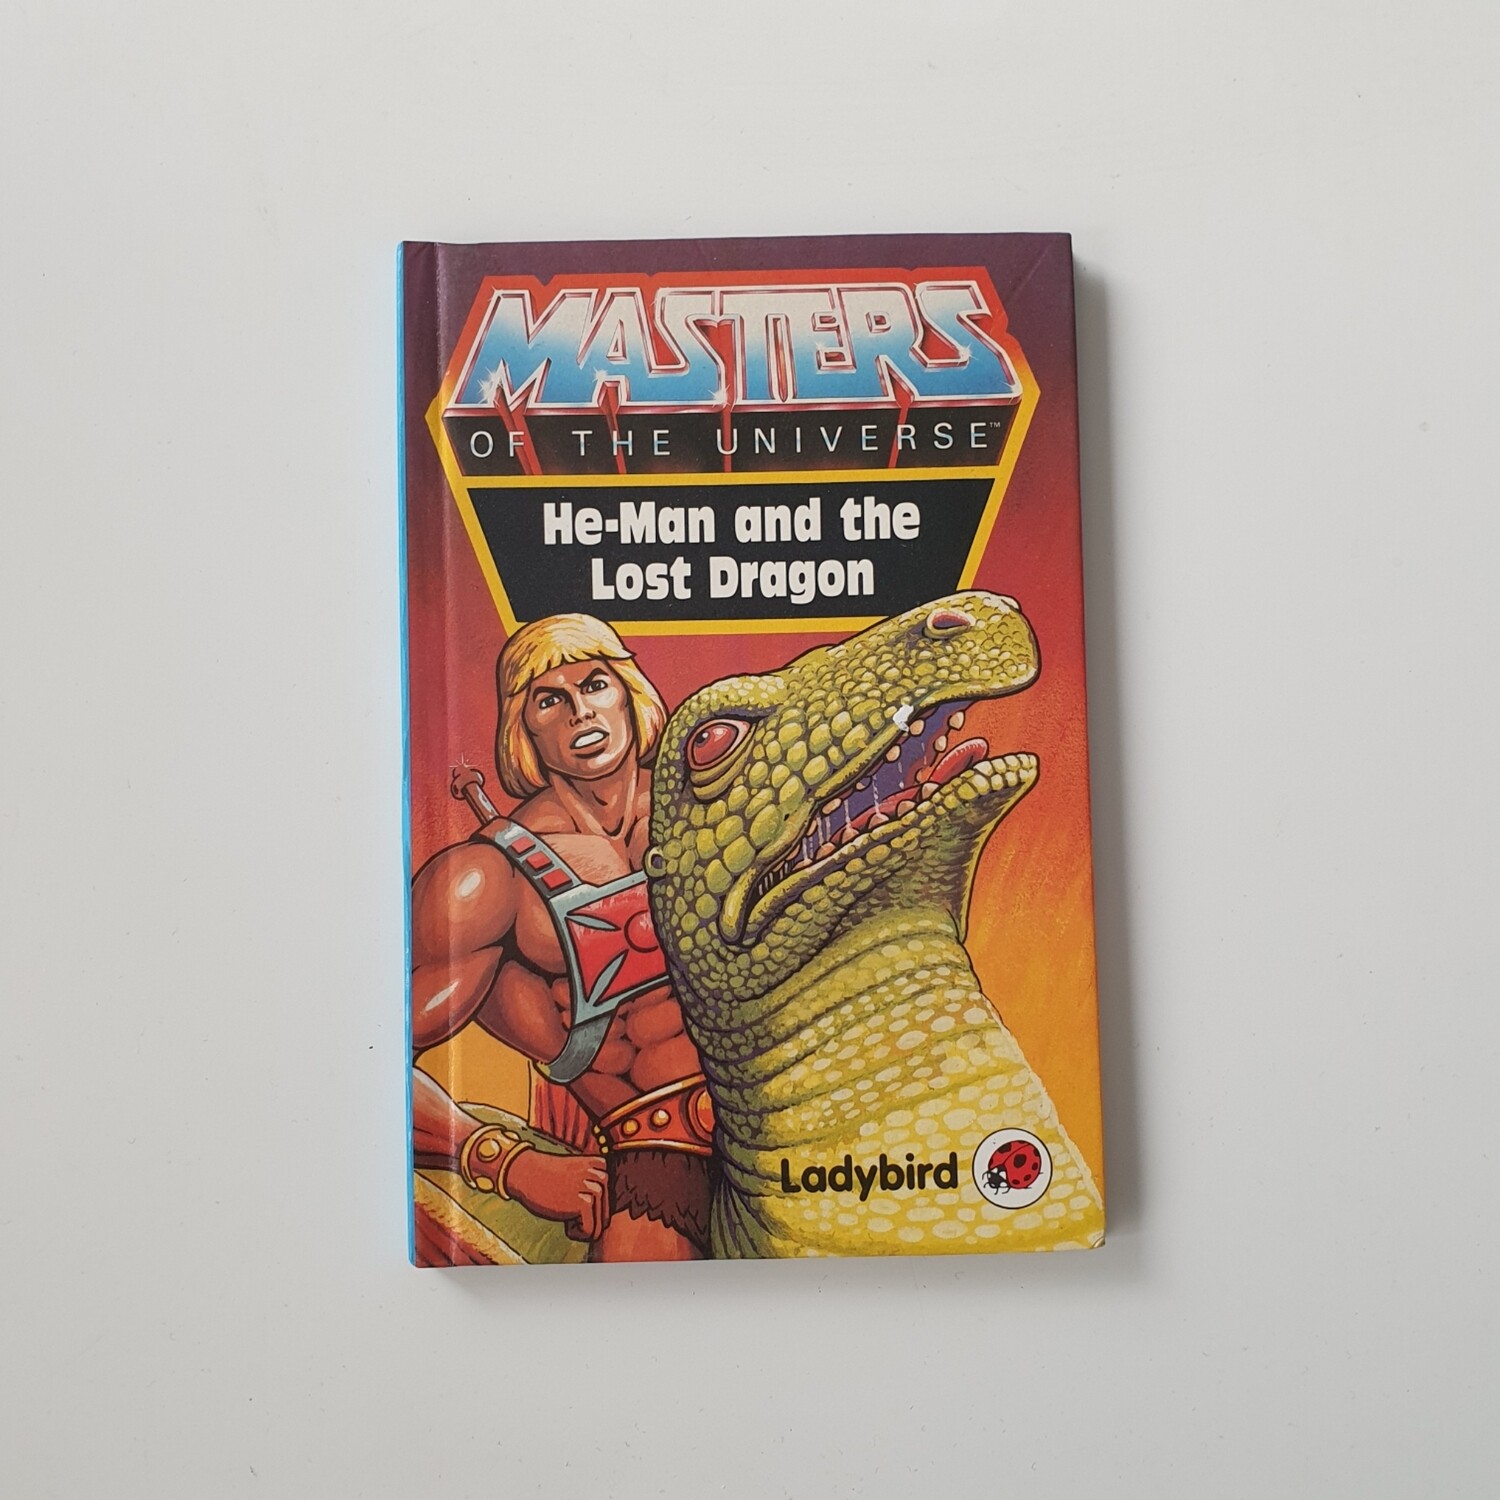 He-Man and the lost dragon